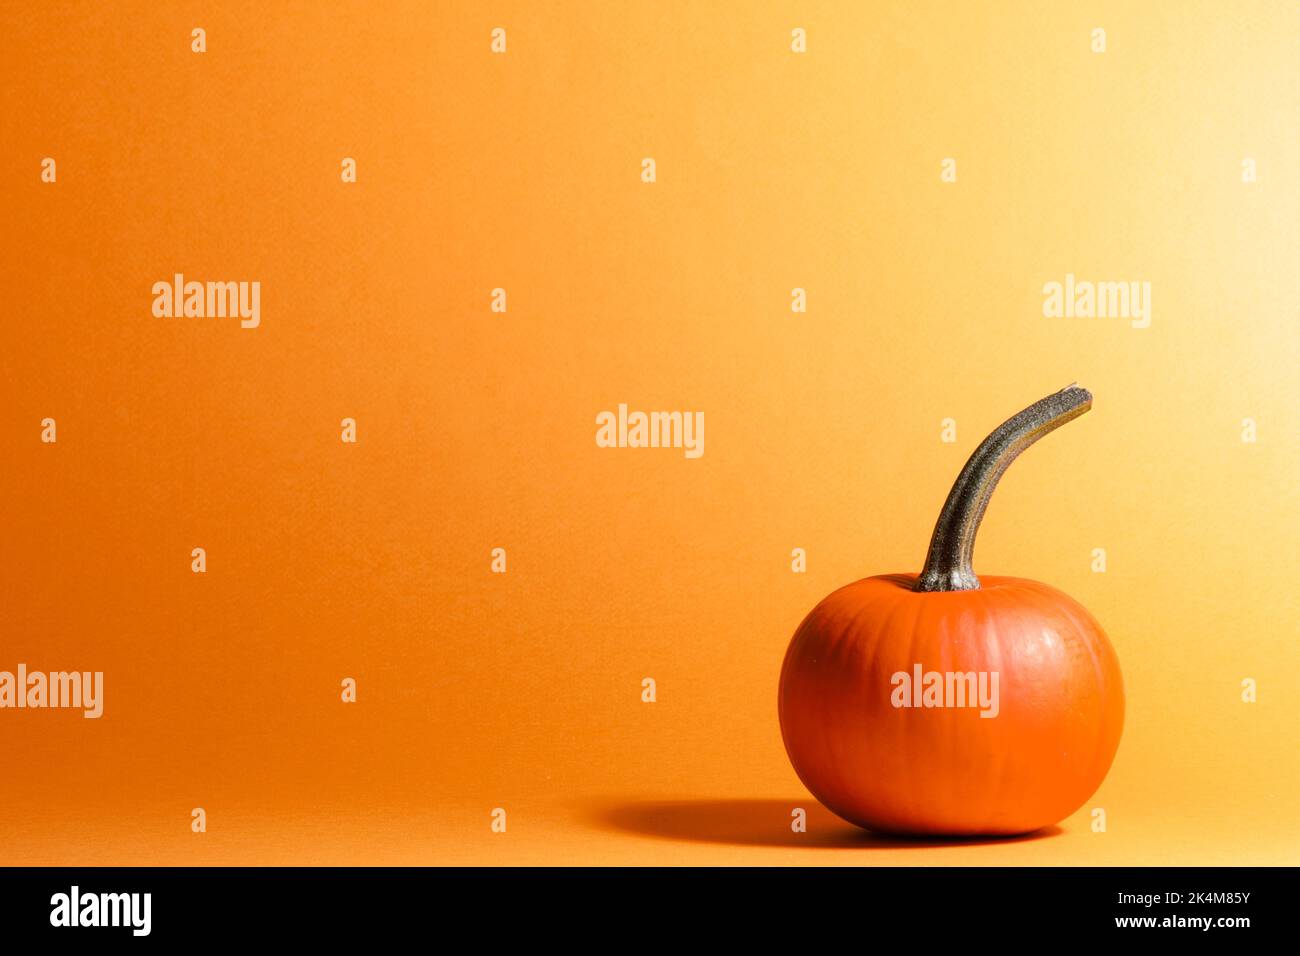 Close-up of a whole ripe pumpkin on orange background. With space to copy. Halloween Celebration Concept. Minimal design Stock Photo